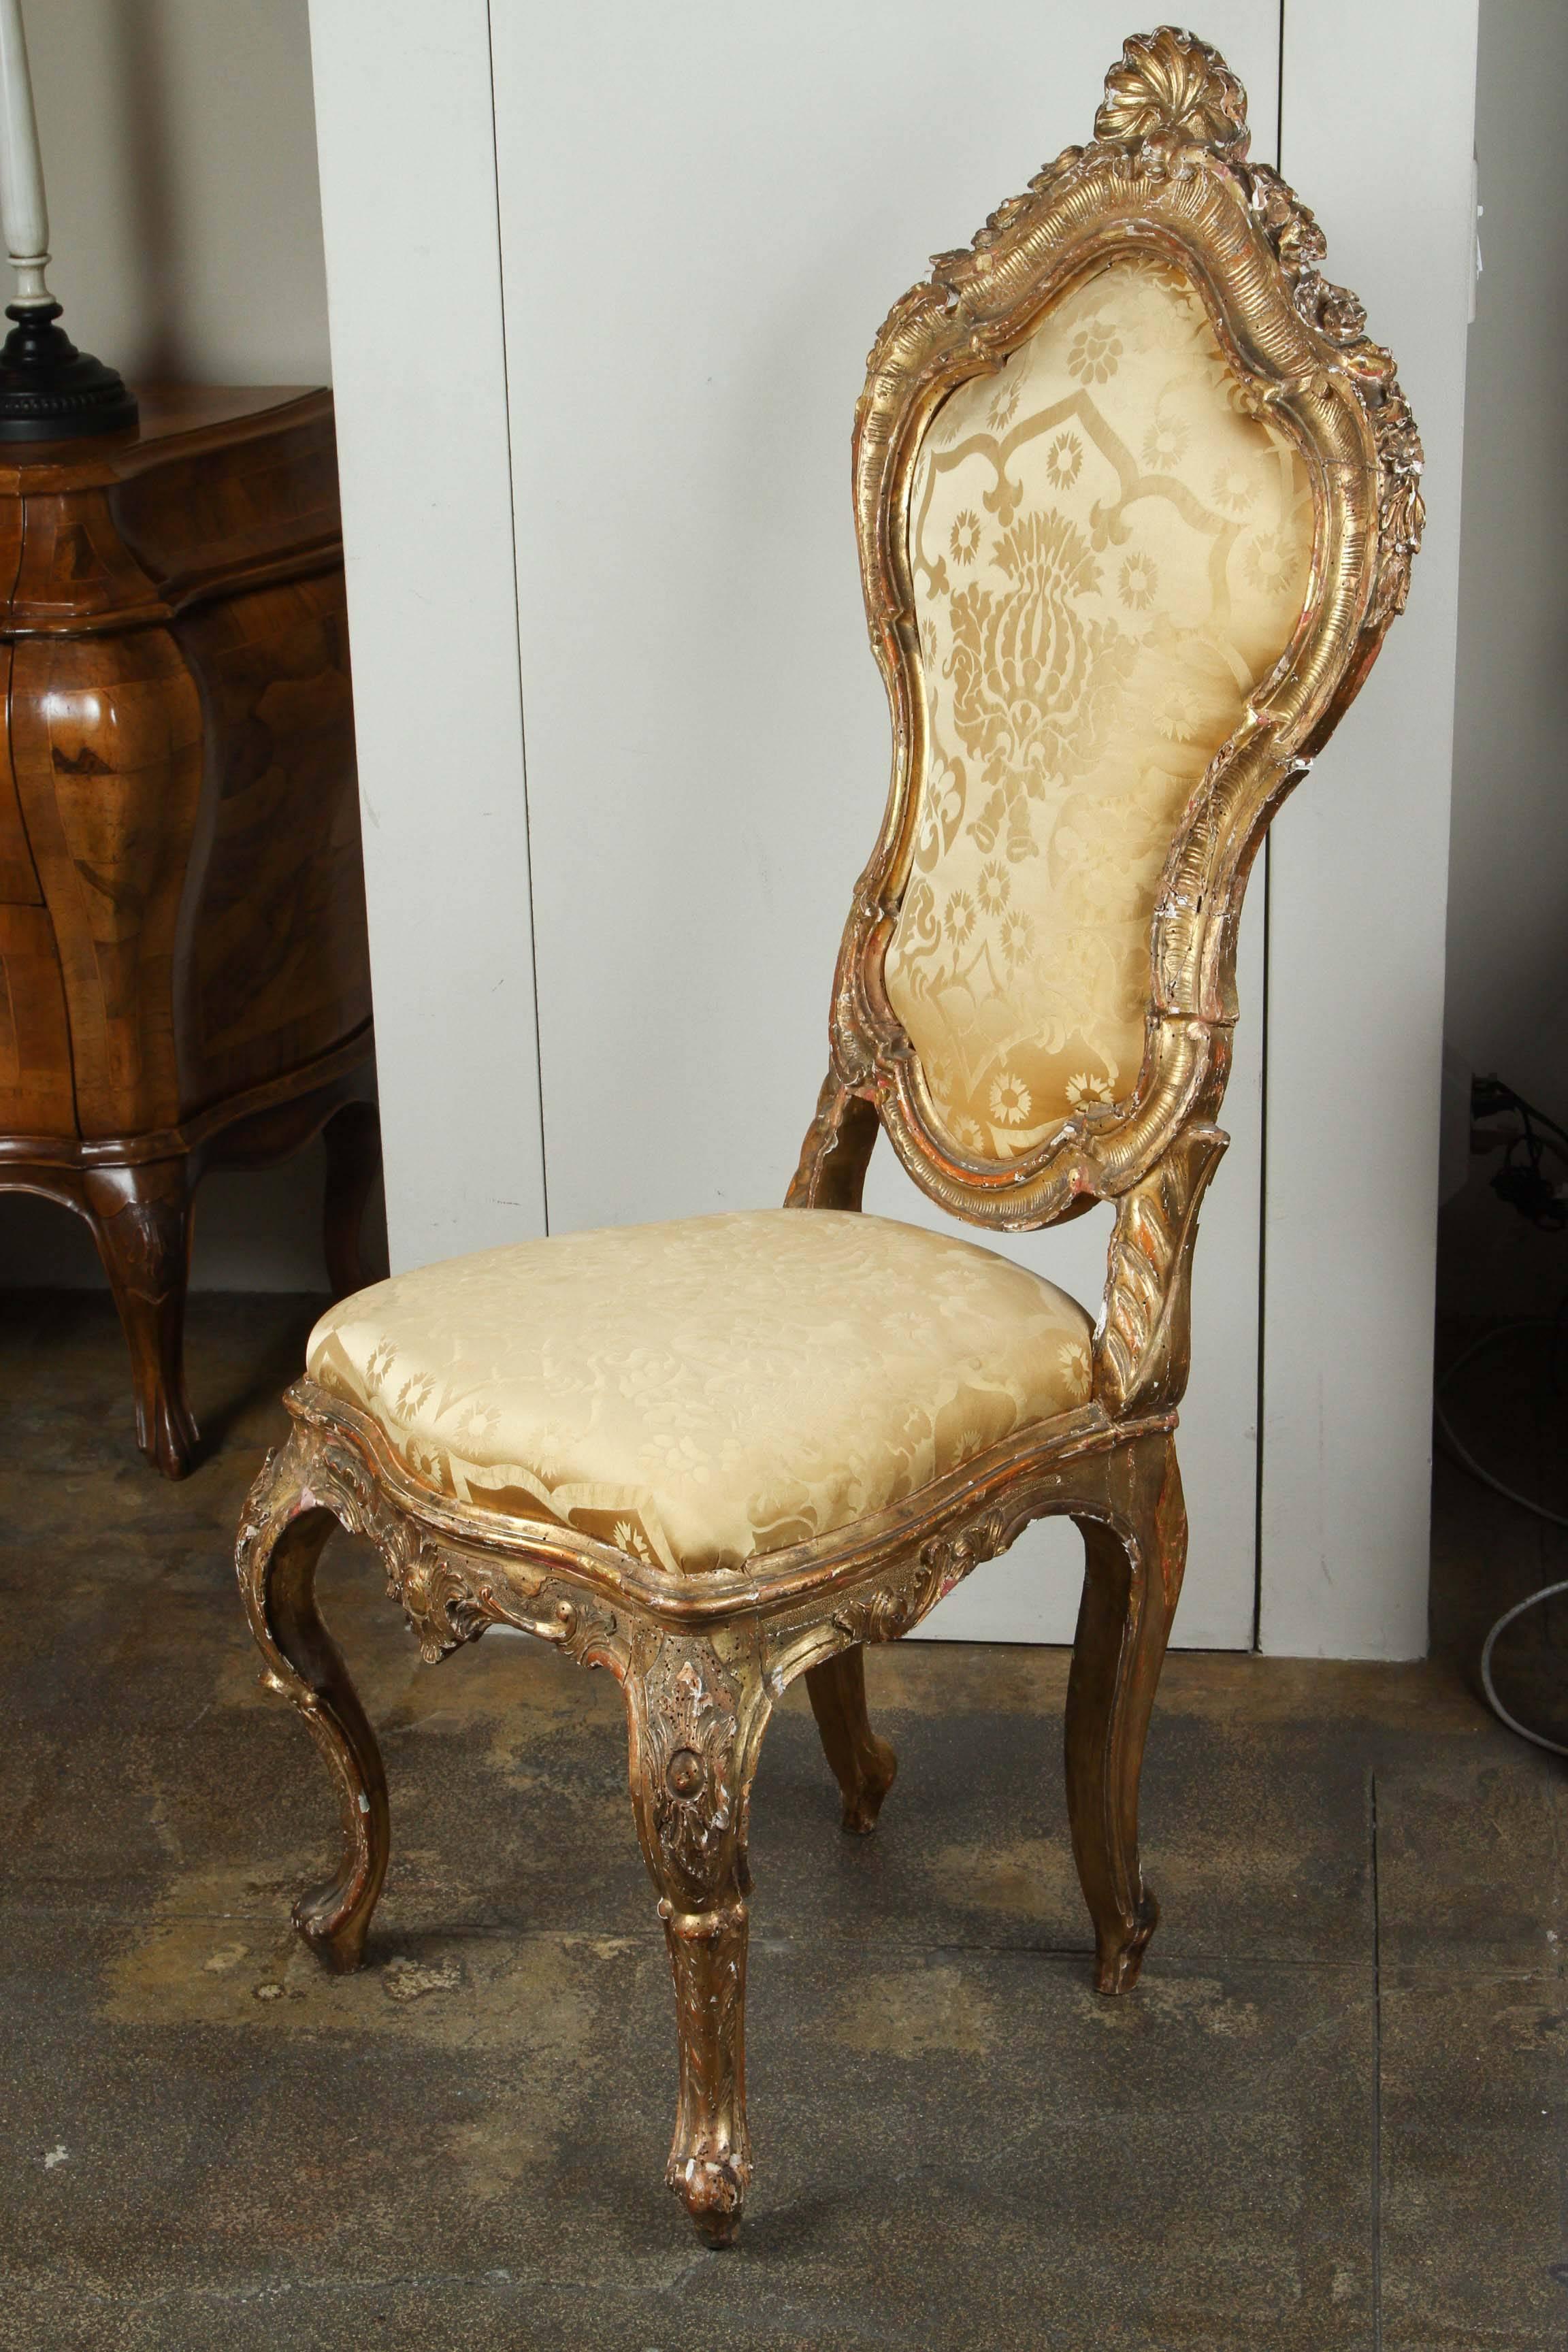 18th century chairs styles